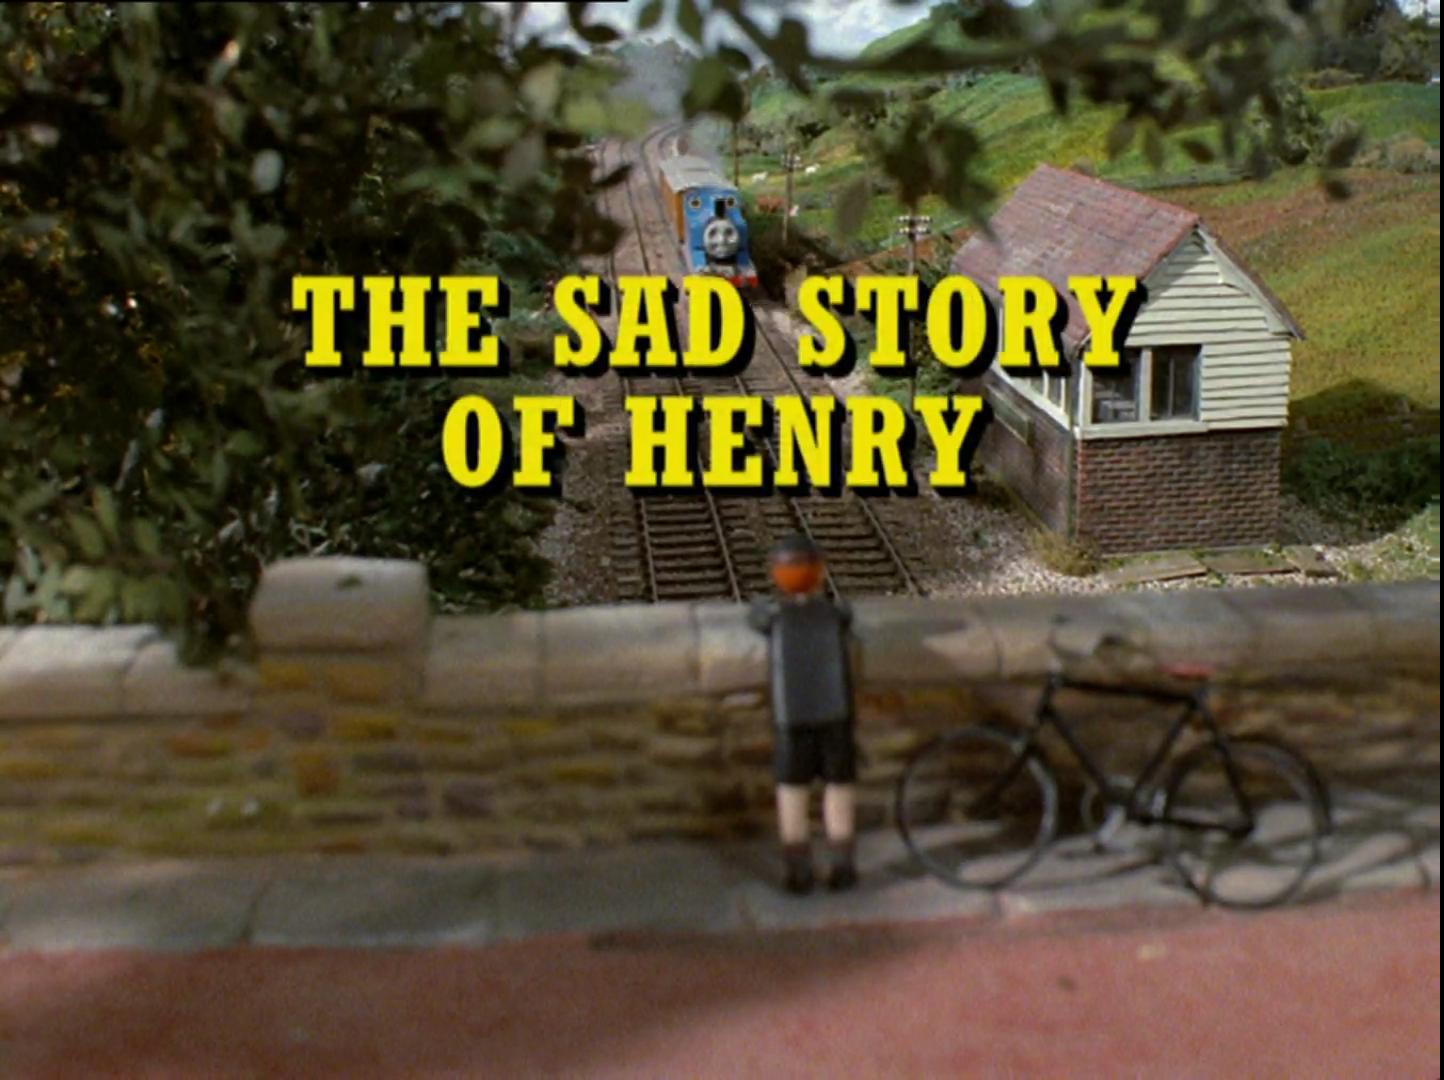 Episode 3 - The Sad Story of Henry